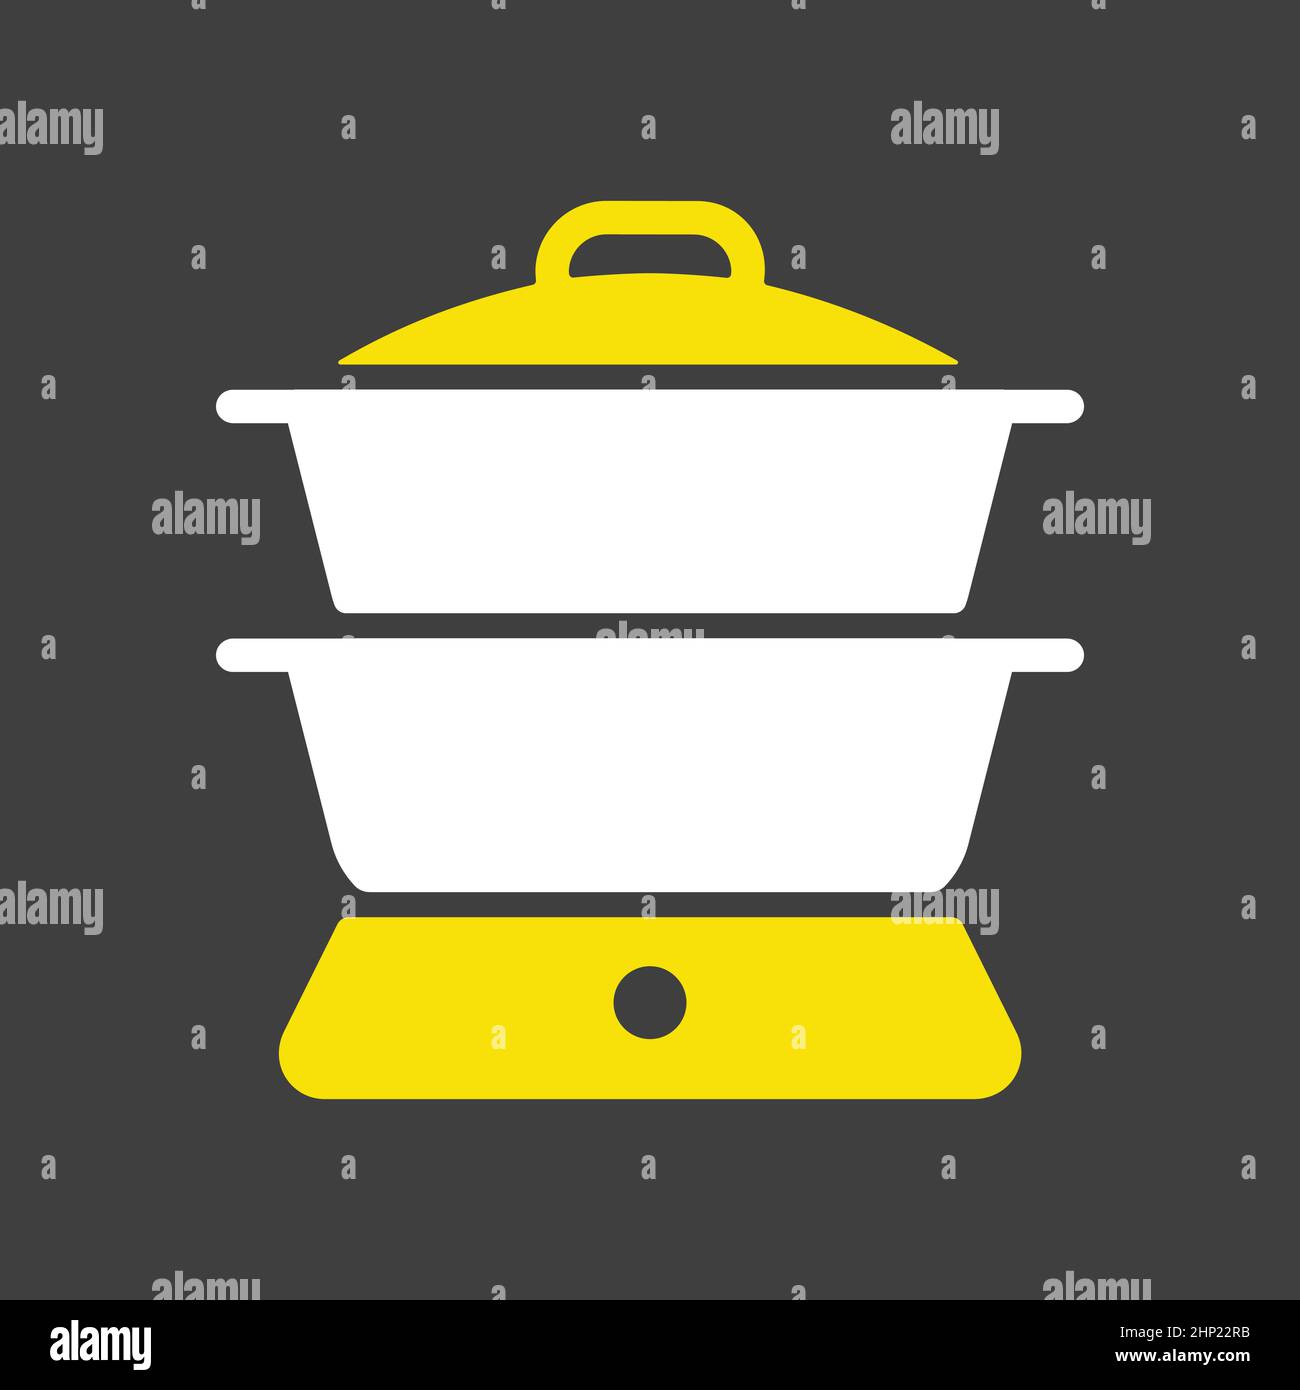 Double Boiler Pan Set Cartoon Vector Graphic by pikepicture · Creative  Fabrica